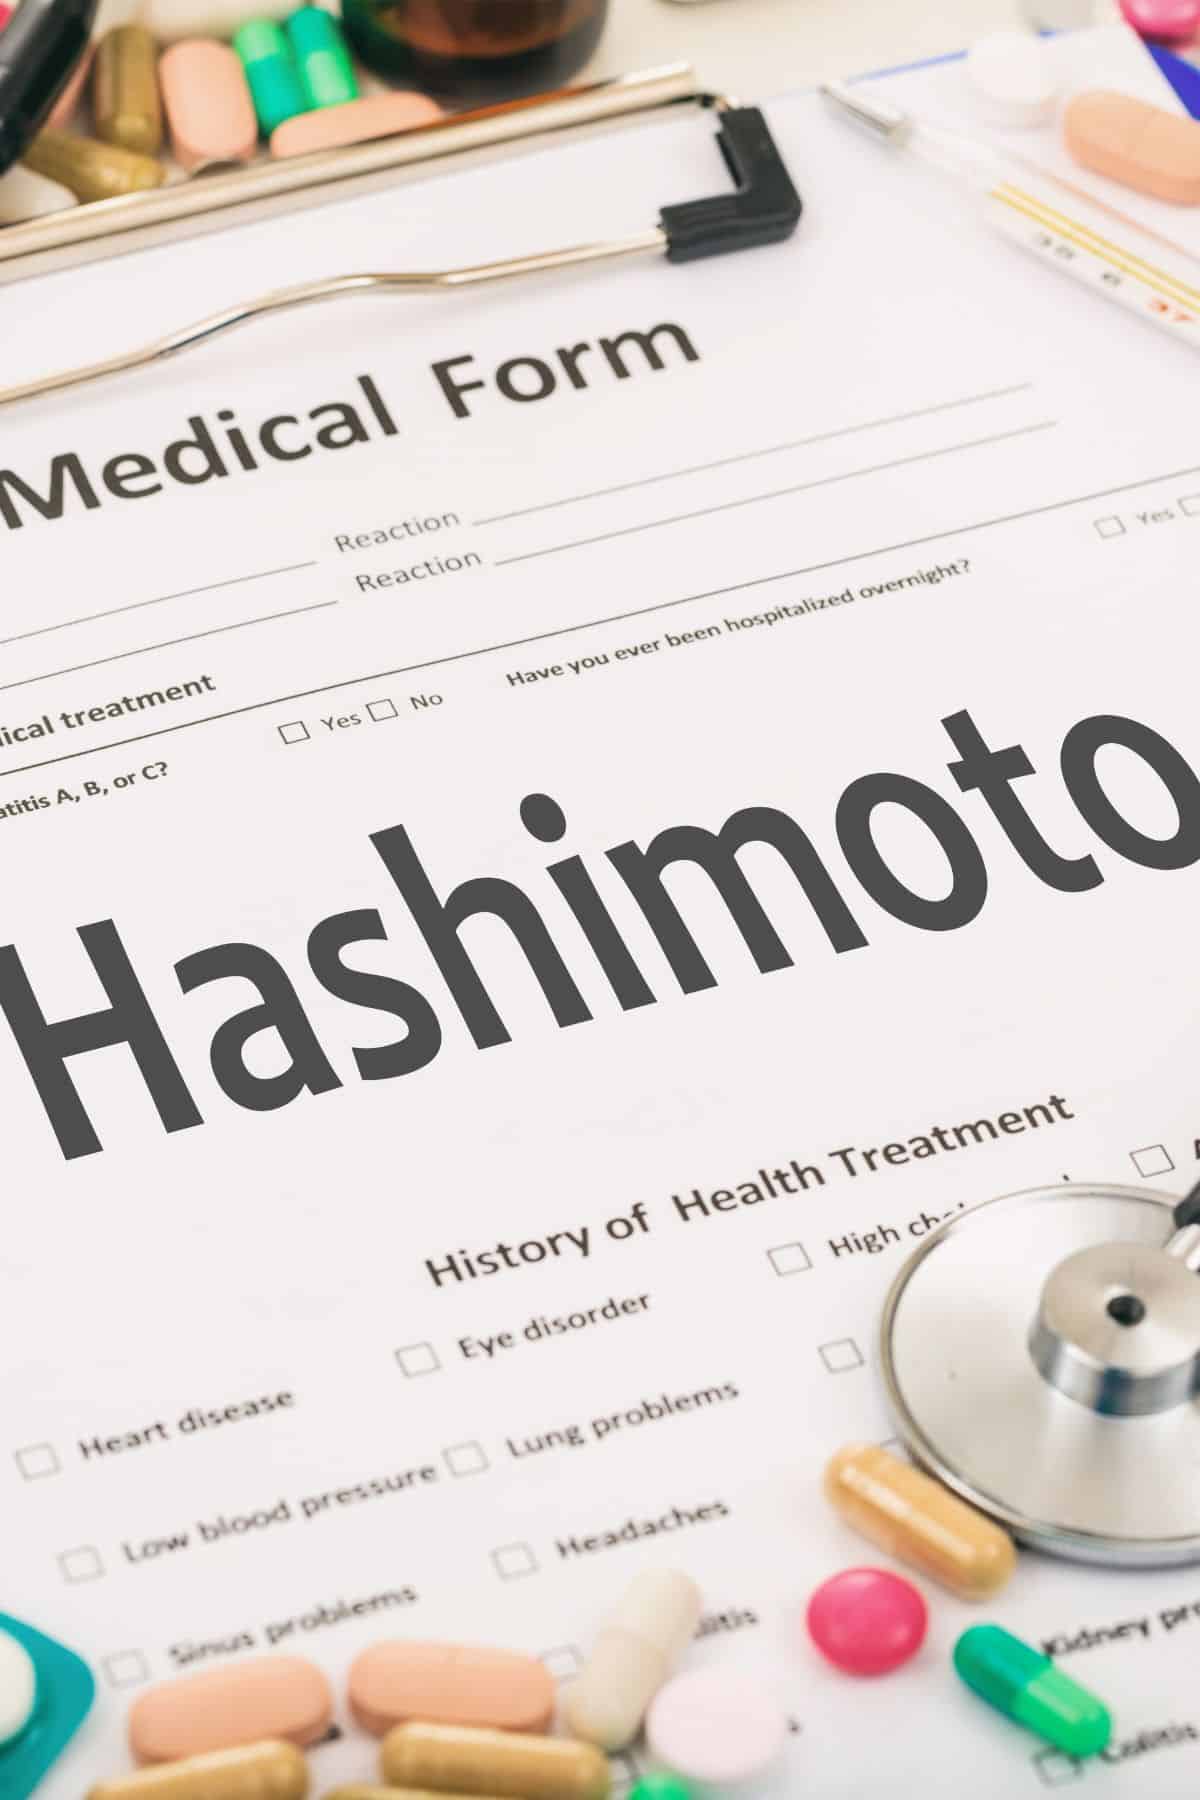 a medical form labeled with "Hashimoto".